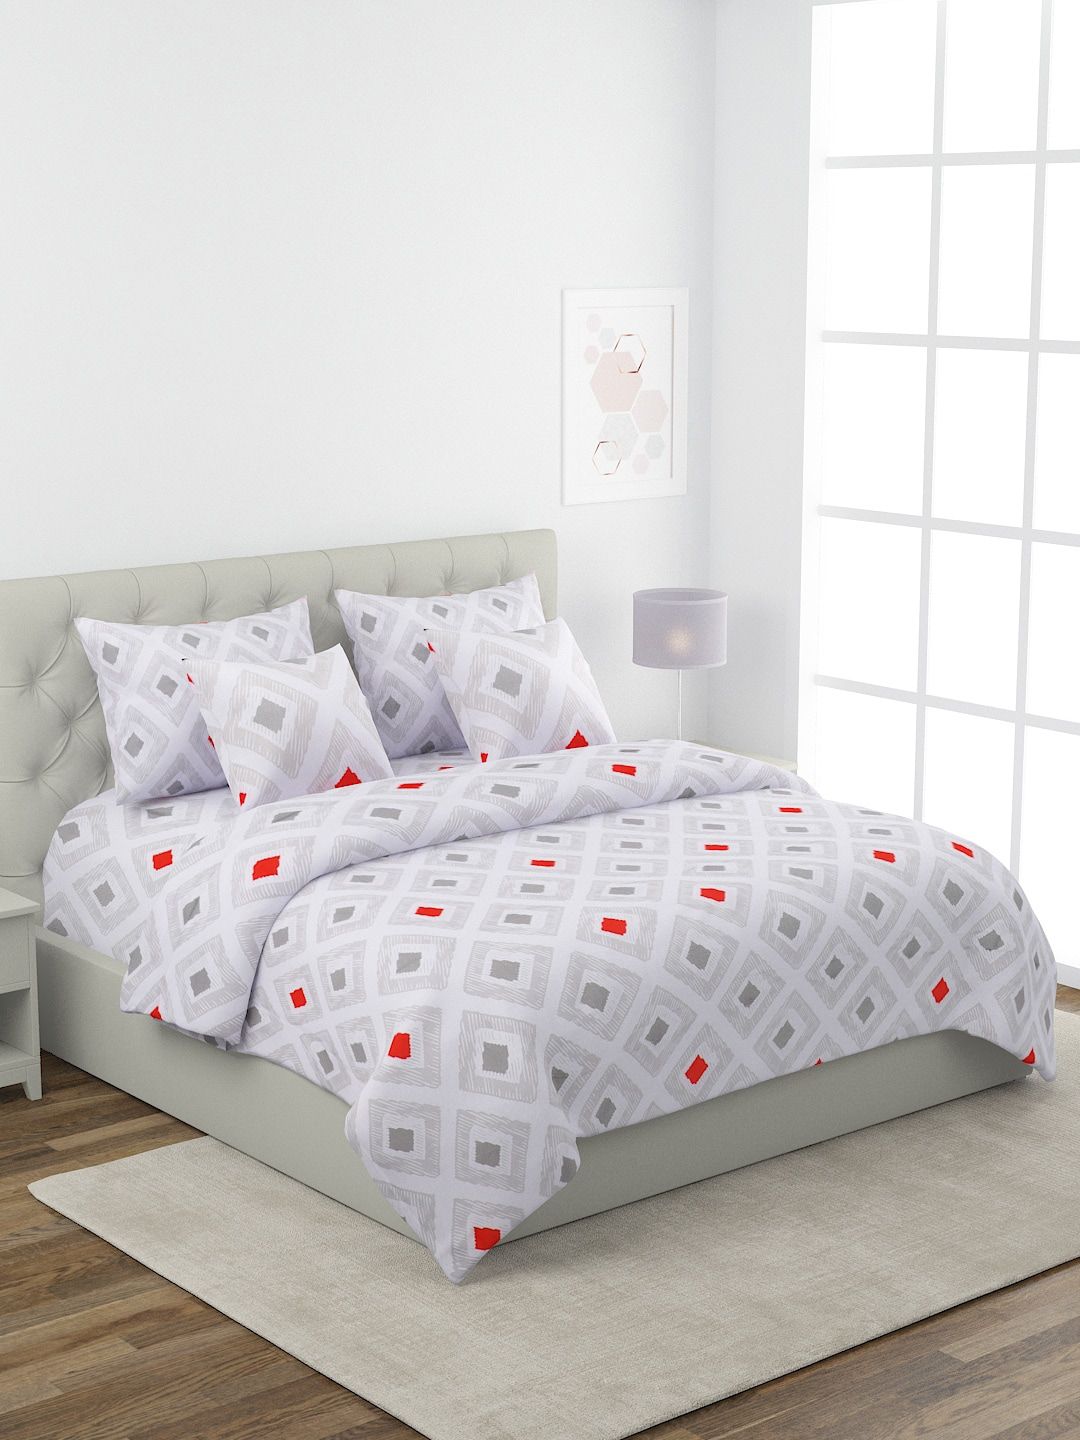 ROMEE Grey & Red Geometric Printed Double King Bedding Set with AC Comforter Price in India